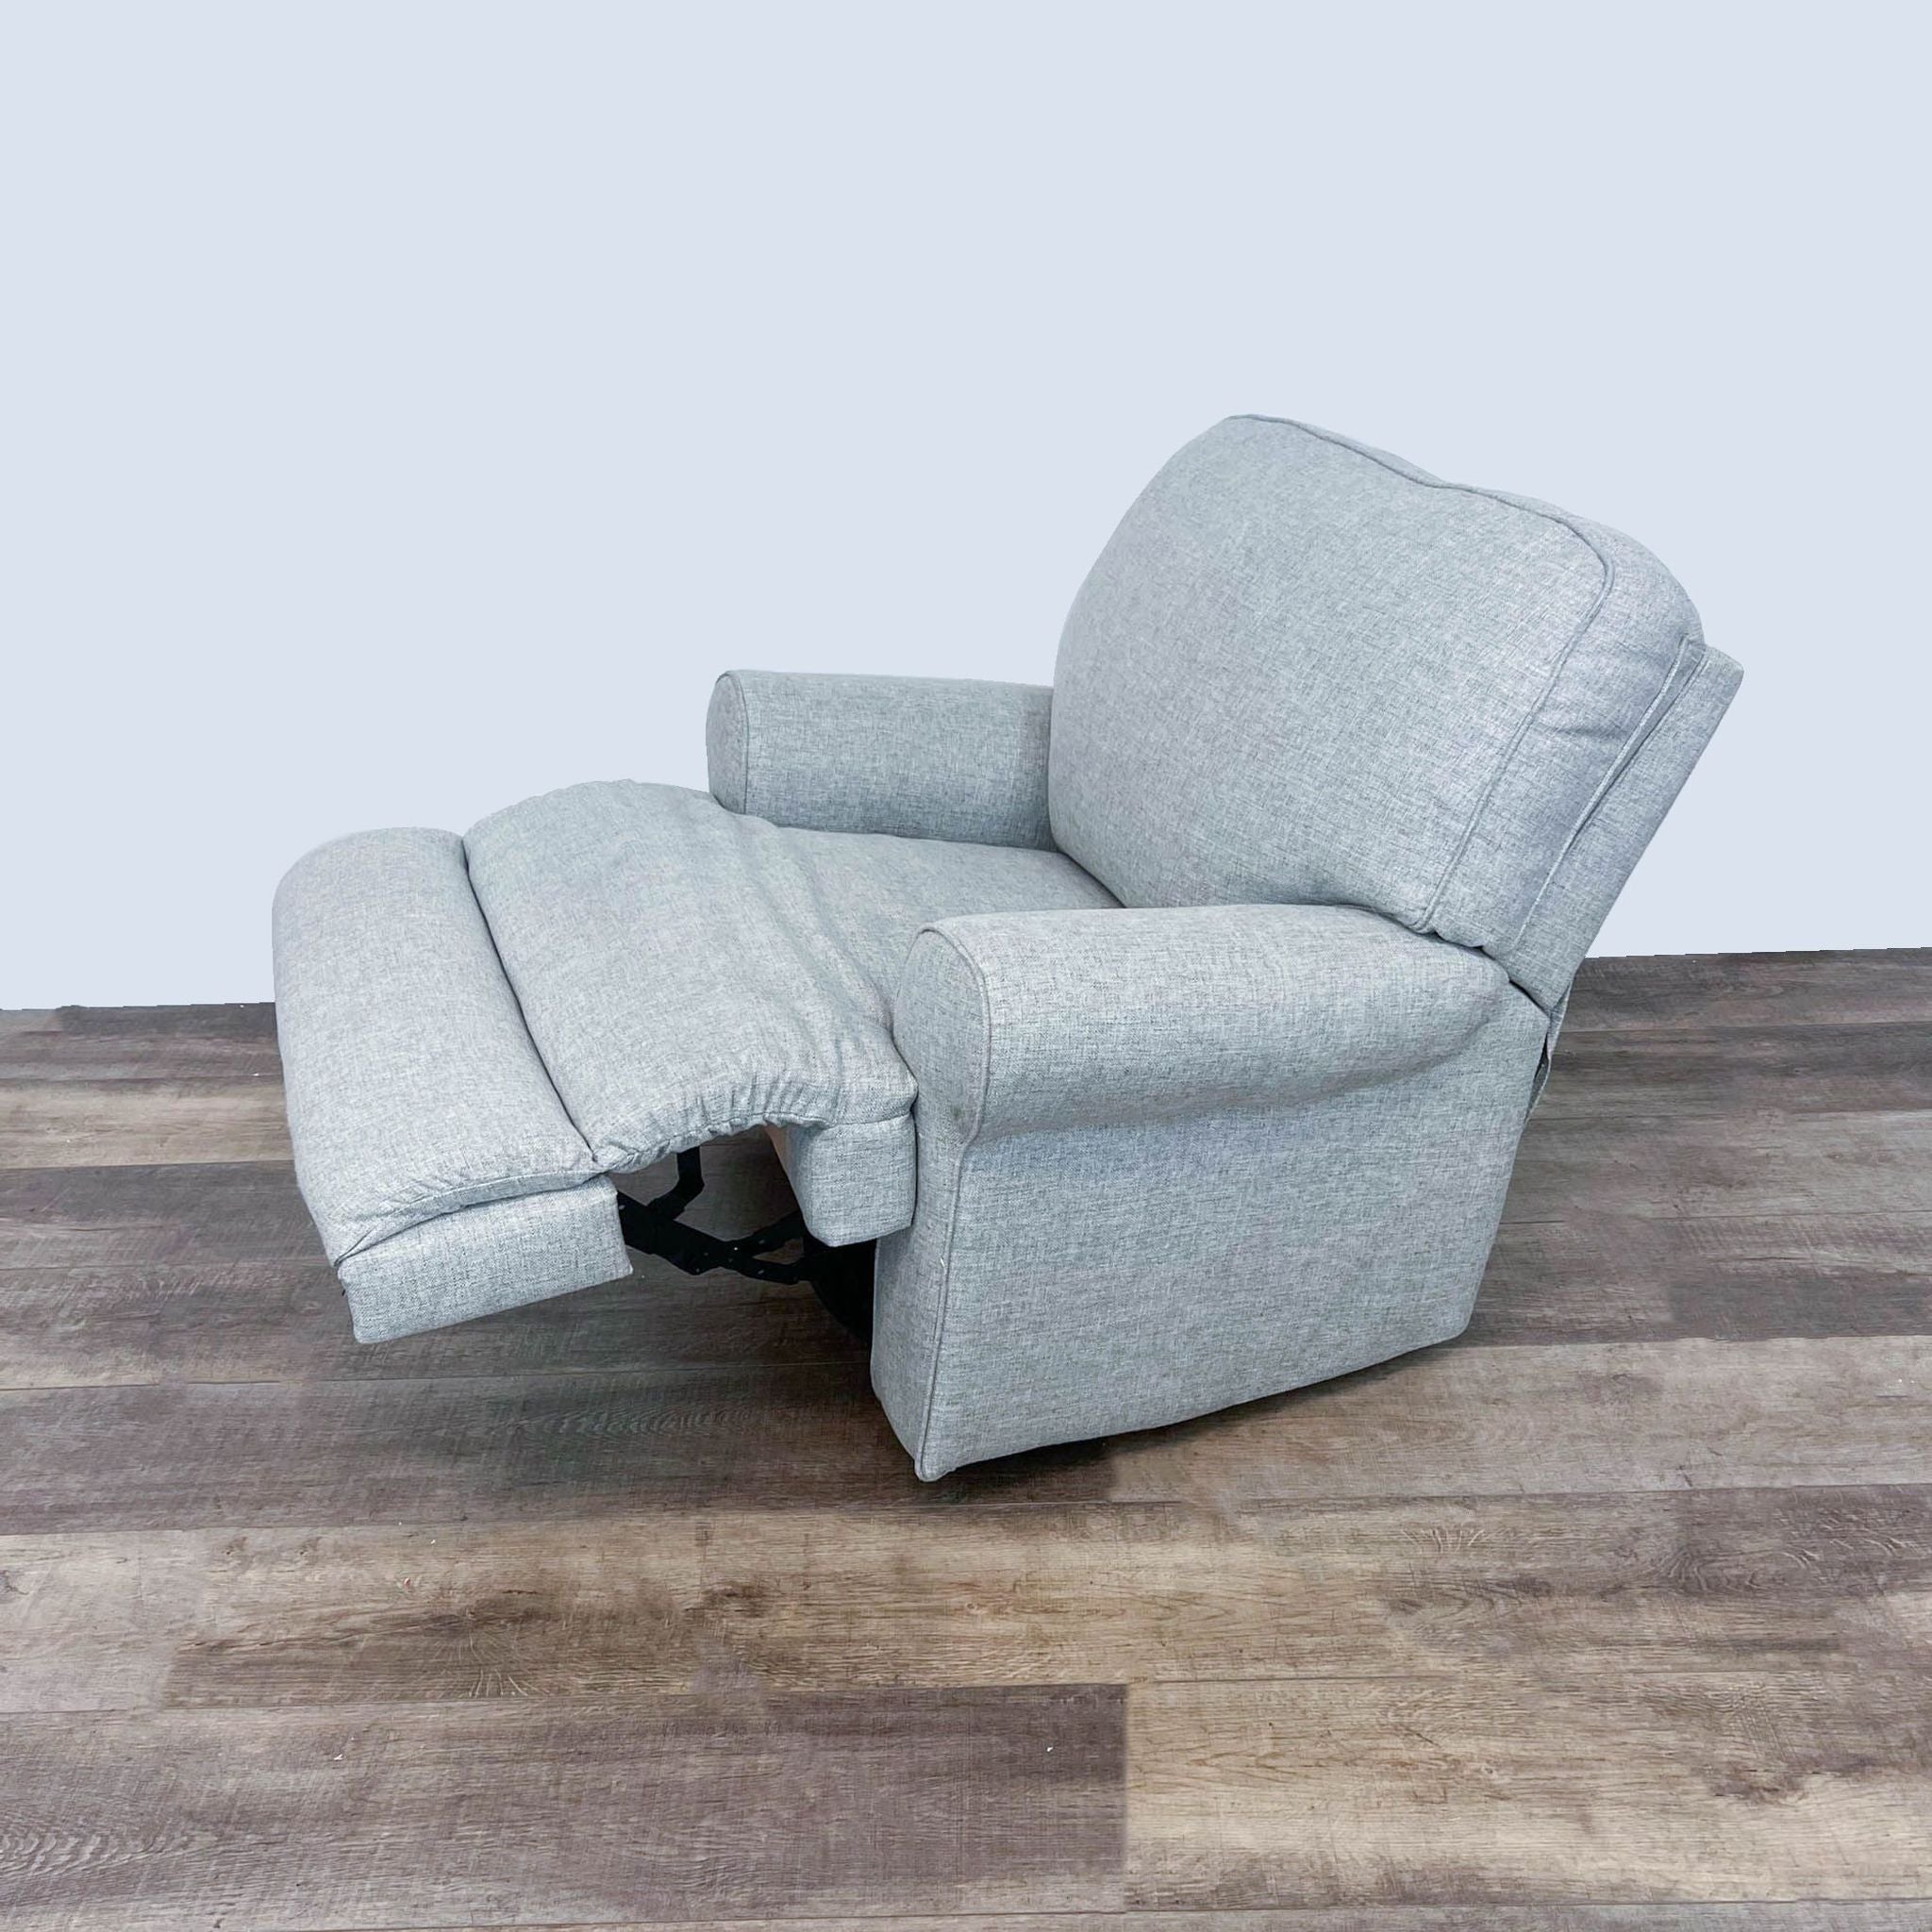 Contemporary Ferncliff lounge chair with easy recline feature, upholstered in neutral fabric, displayed in partially reclined position.